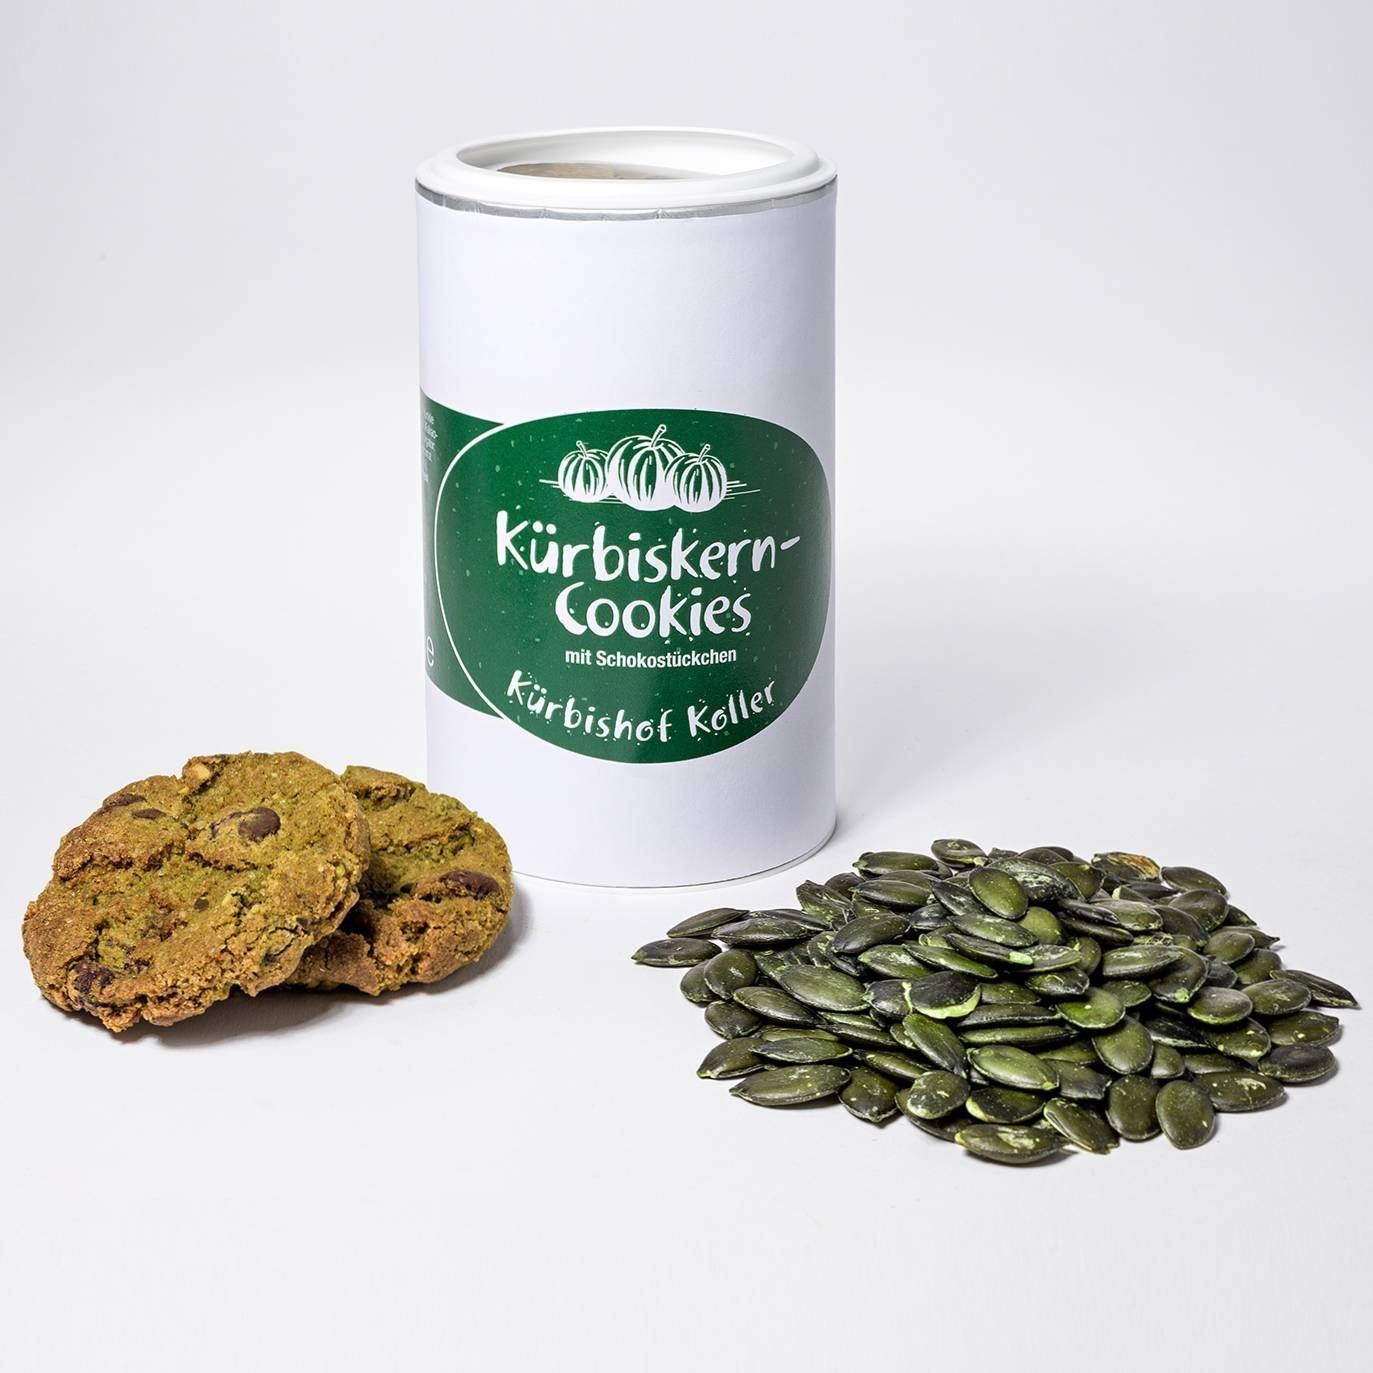 Pumpkin Seed Cookies with Chocolate Chips on the Solomon Islands